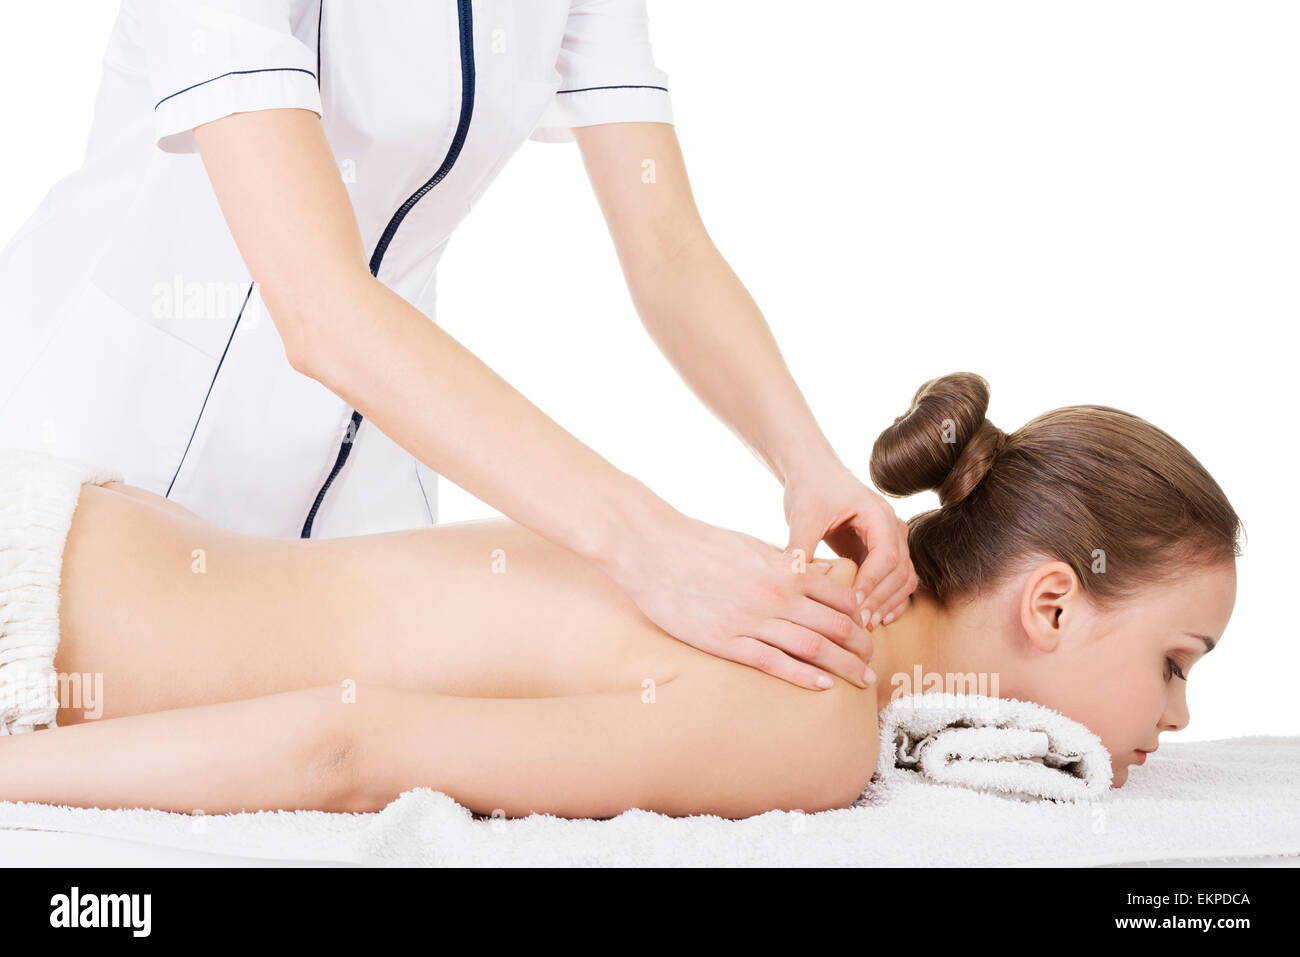 Woman relaxing beeing massaged in spa saloon Stock Photo